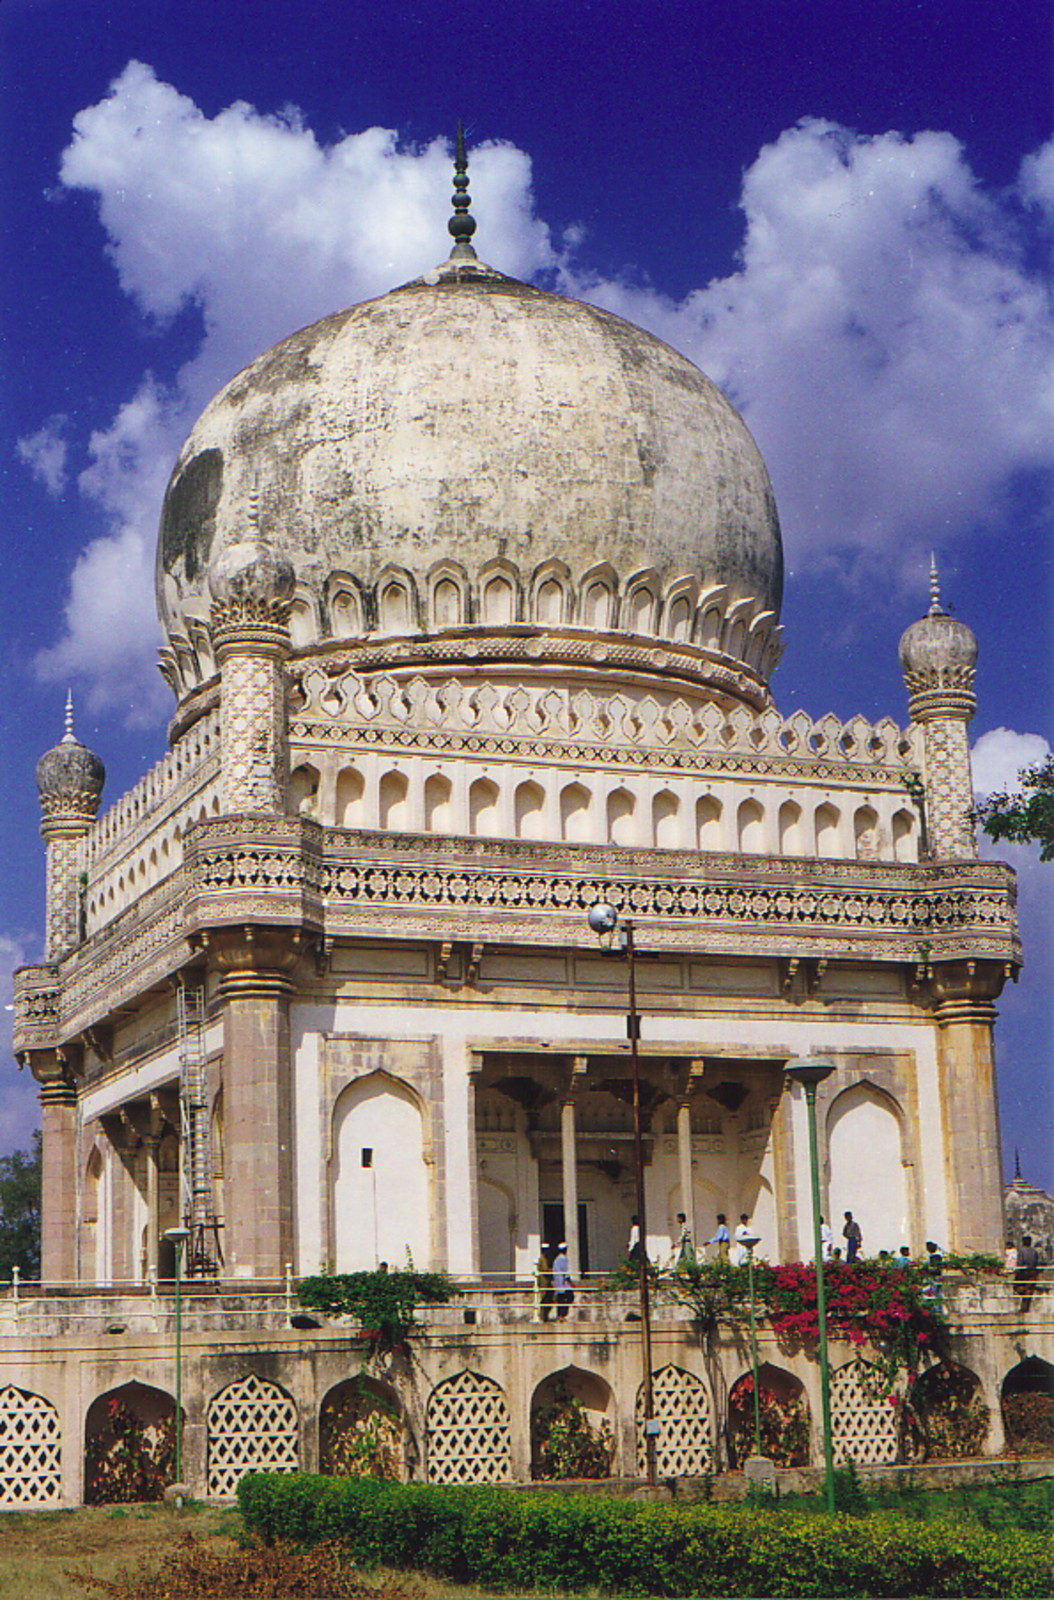 The Great Mosque at Qutab Shahi